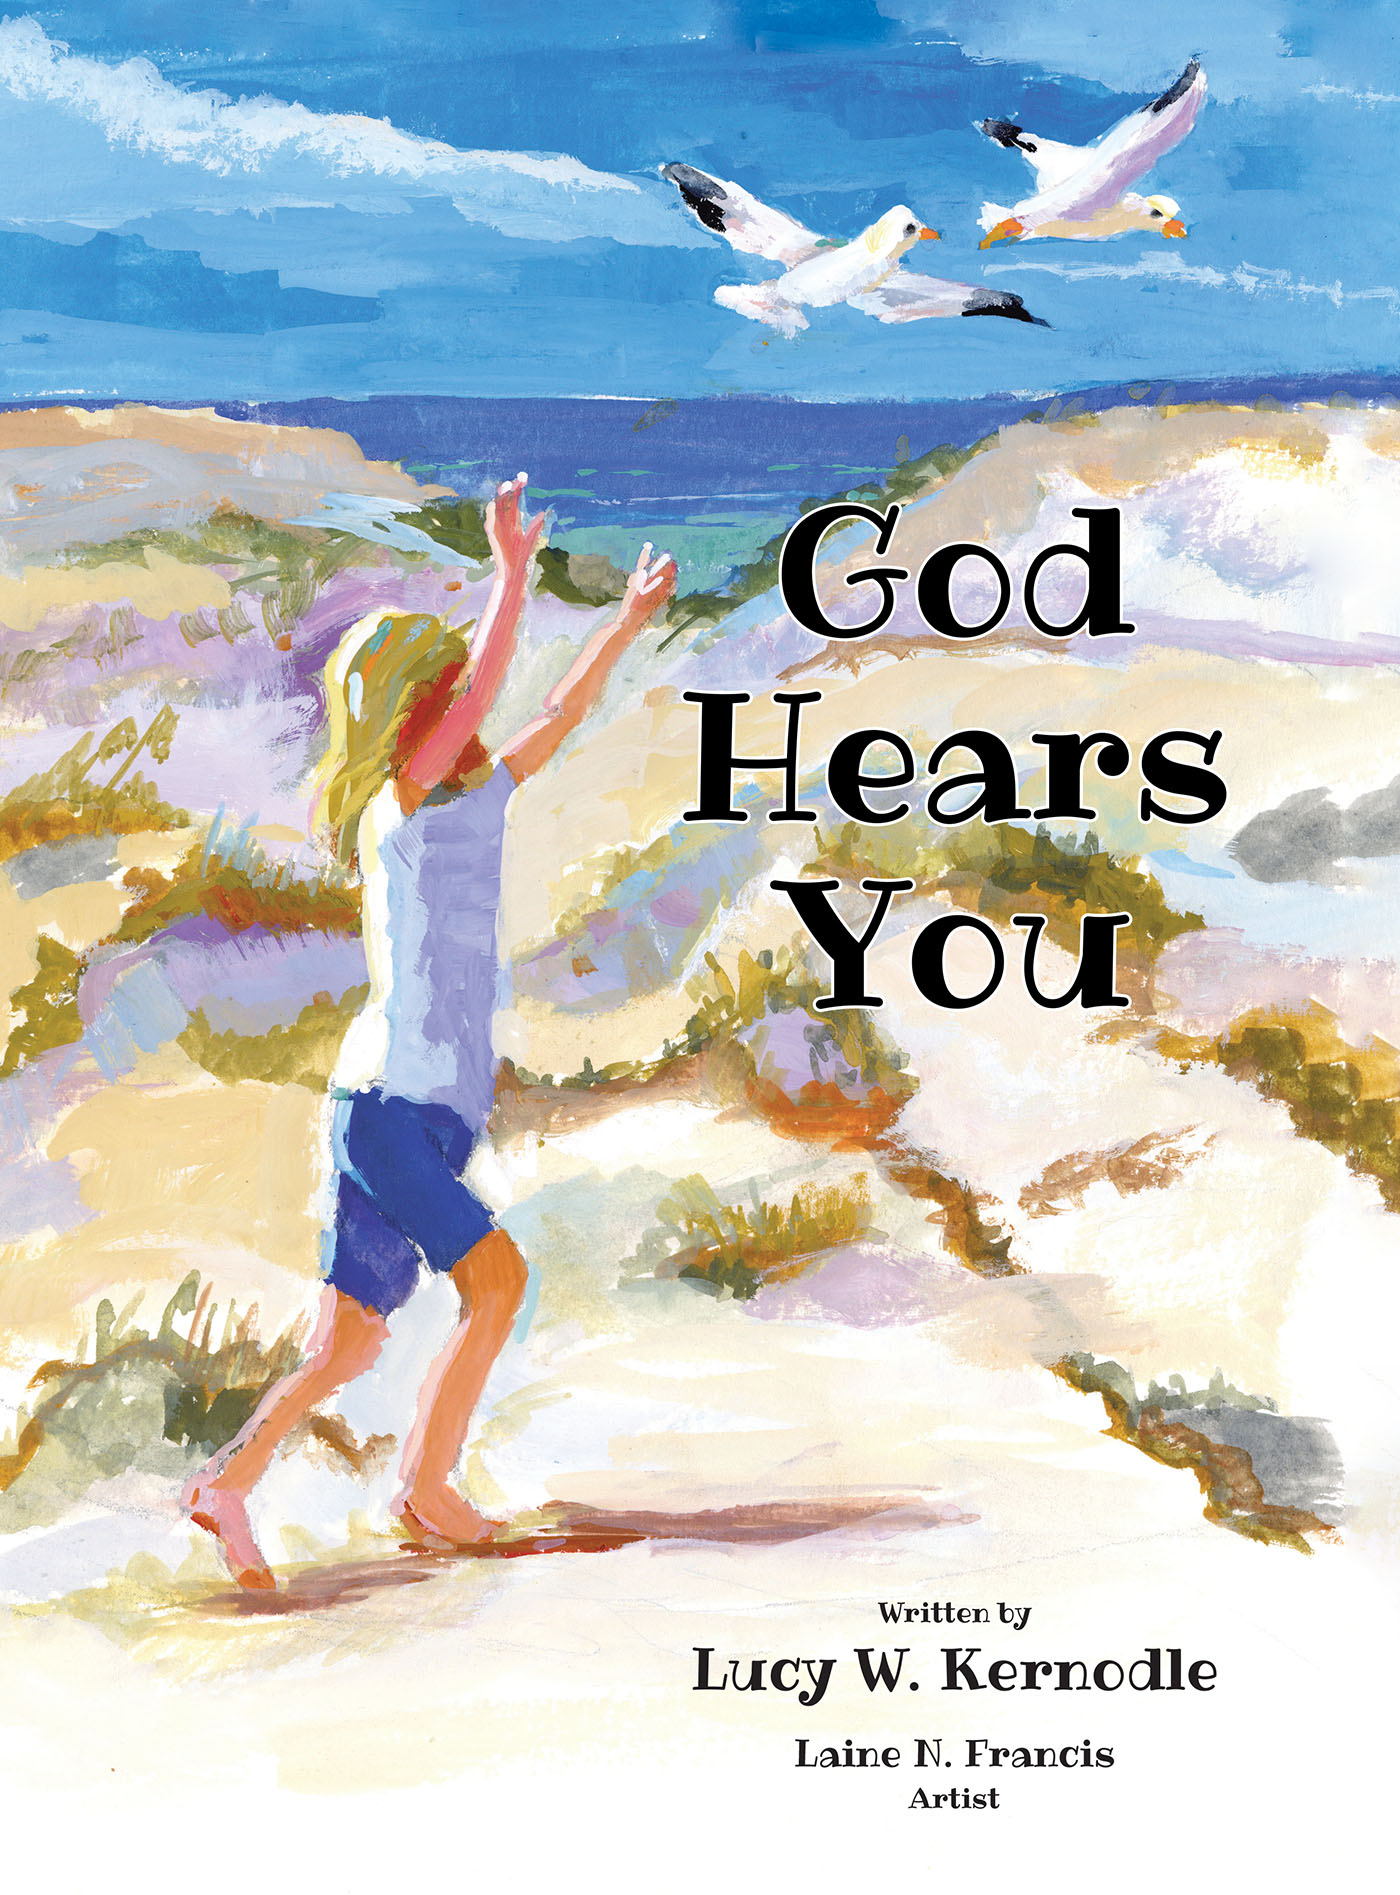 Lucy W. Kernodle’s Newly Released "God Hears You" is an Inspiring True Story of an Unexpected Experience That Carried a Powerful Message